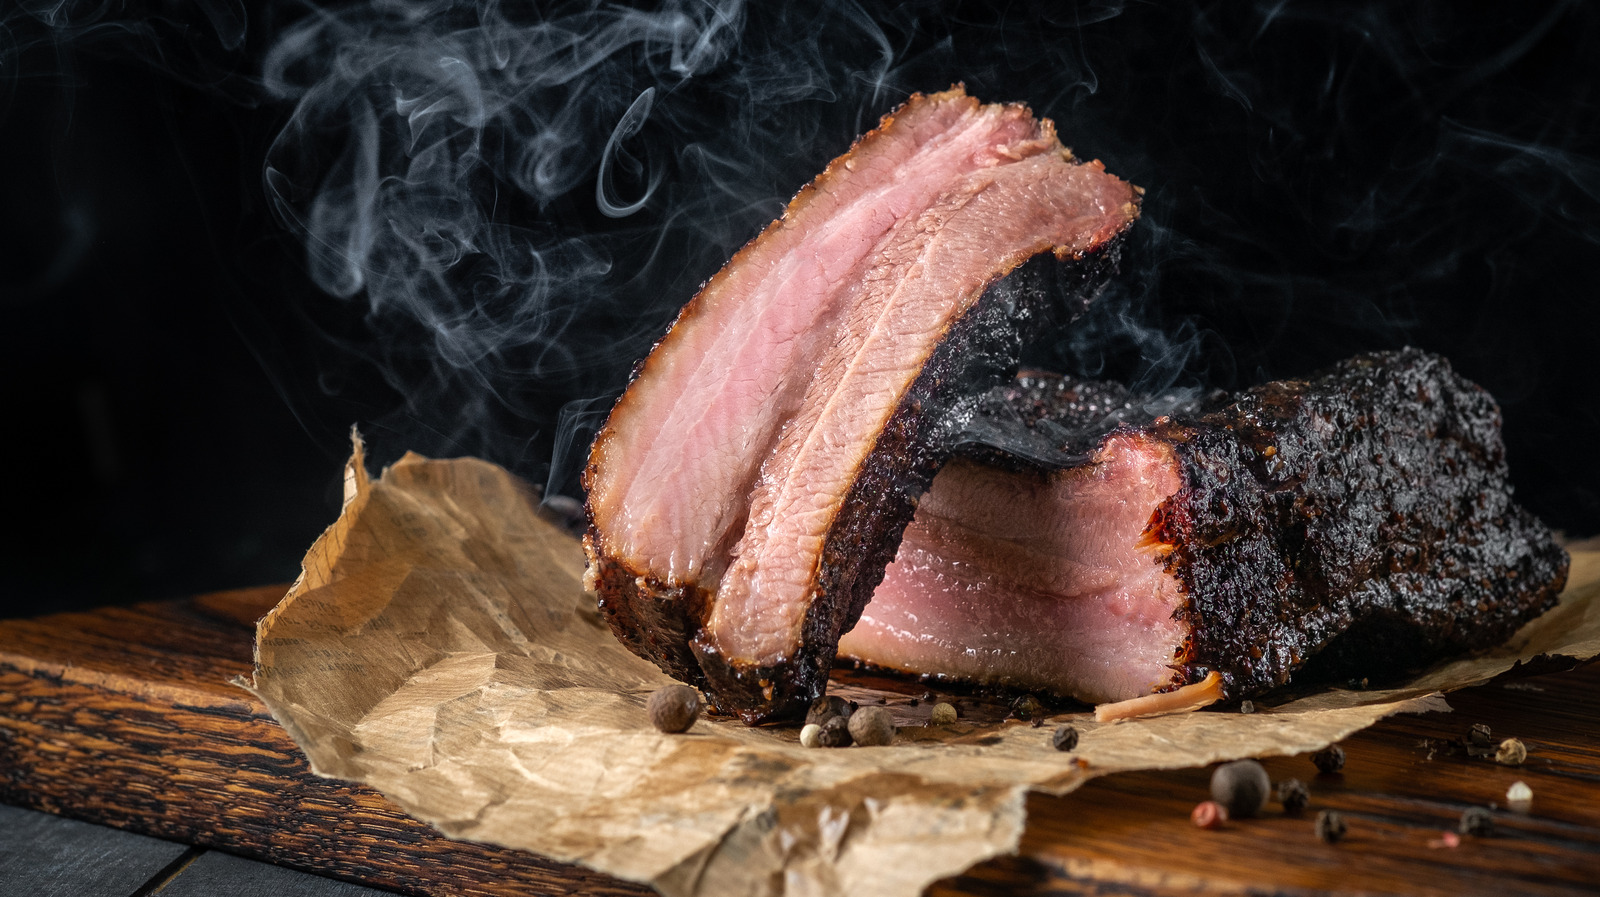 7 Rookie Mistakes to Avoid When Smoking Meat